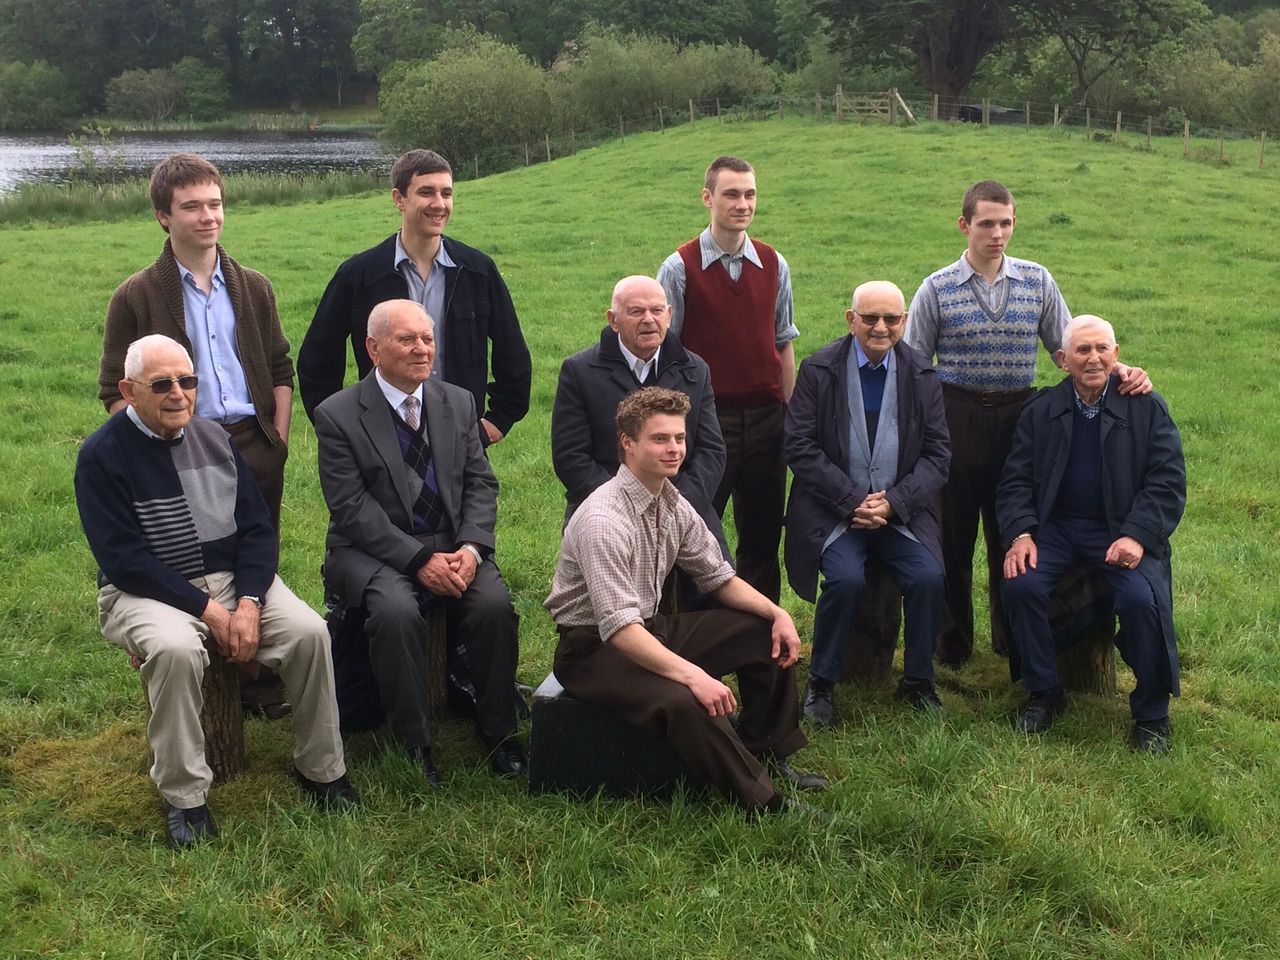 Some of the child actors together with the Survivors they played – Harry Olmer, Arek Hersh MBE, Sir Ben Helfgott, Sam Laskier and Ike Alterman